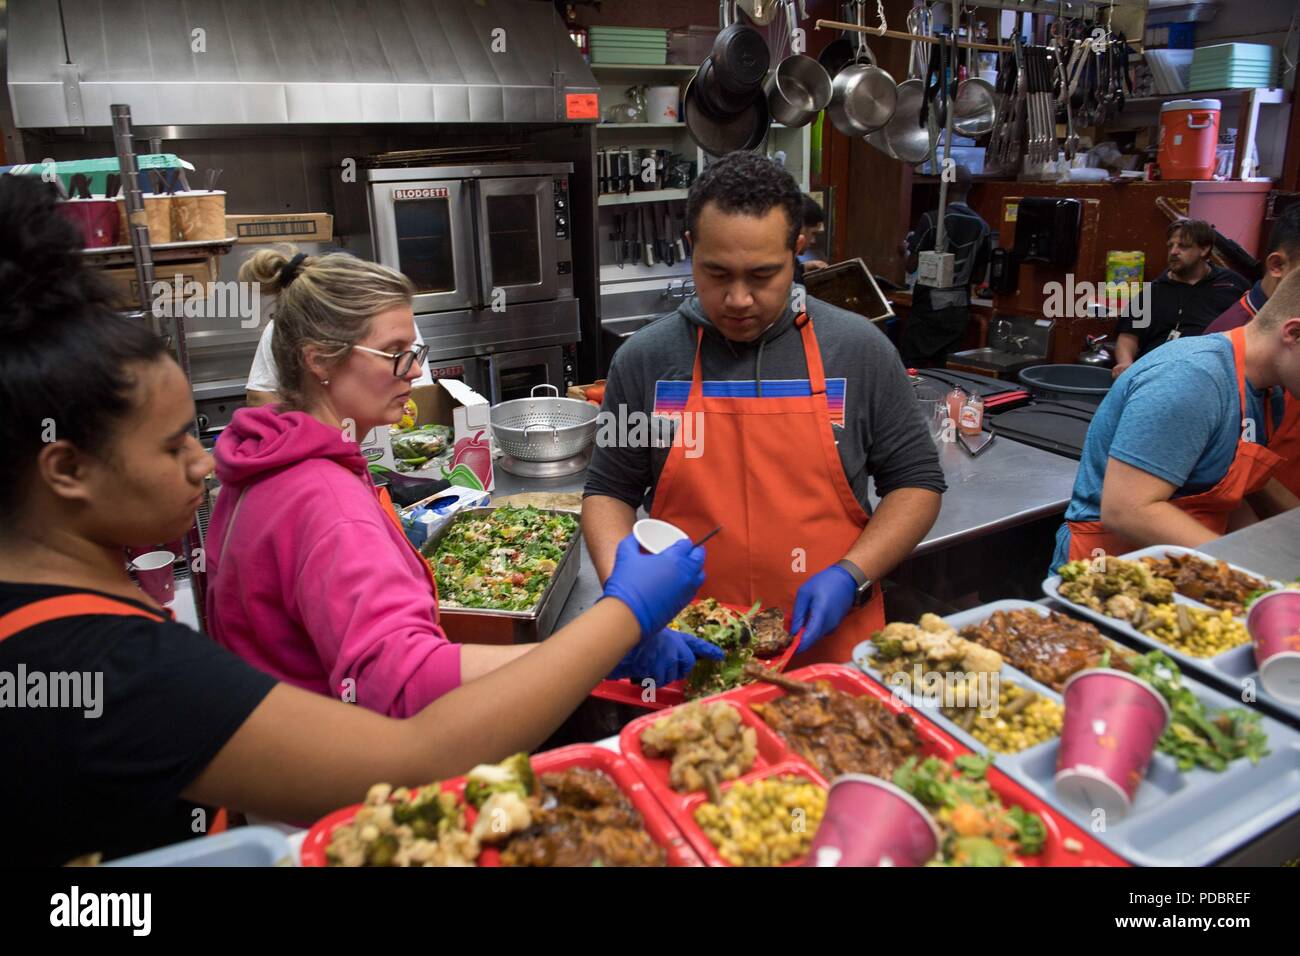 180803-N-DA737-0186 SEATTLE (Aug. 3, 2018) Hospital Corpsman 1st Class Jonathan Faletoi (right), assigned to Naval Hospital Bremerton, prepares meals with his wife, Stephanie, (middle), and sister, Patricia, (left), at Bread of Life Mission during a Seattle Seafair Fleet Week community relations event. Seafair Fleet Week is an annual celebration of the sea services wherein Sailors, Marines and Coast Guard members from visiting U.S. Navy and Coast Guard ships and ships from Canada make the city a port of call. (U.S. Navy photo by Mass Communication Specialist 2nd Class Jonathan Jiang/Released) Stock Photo